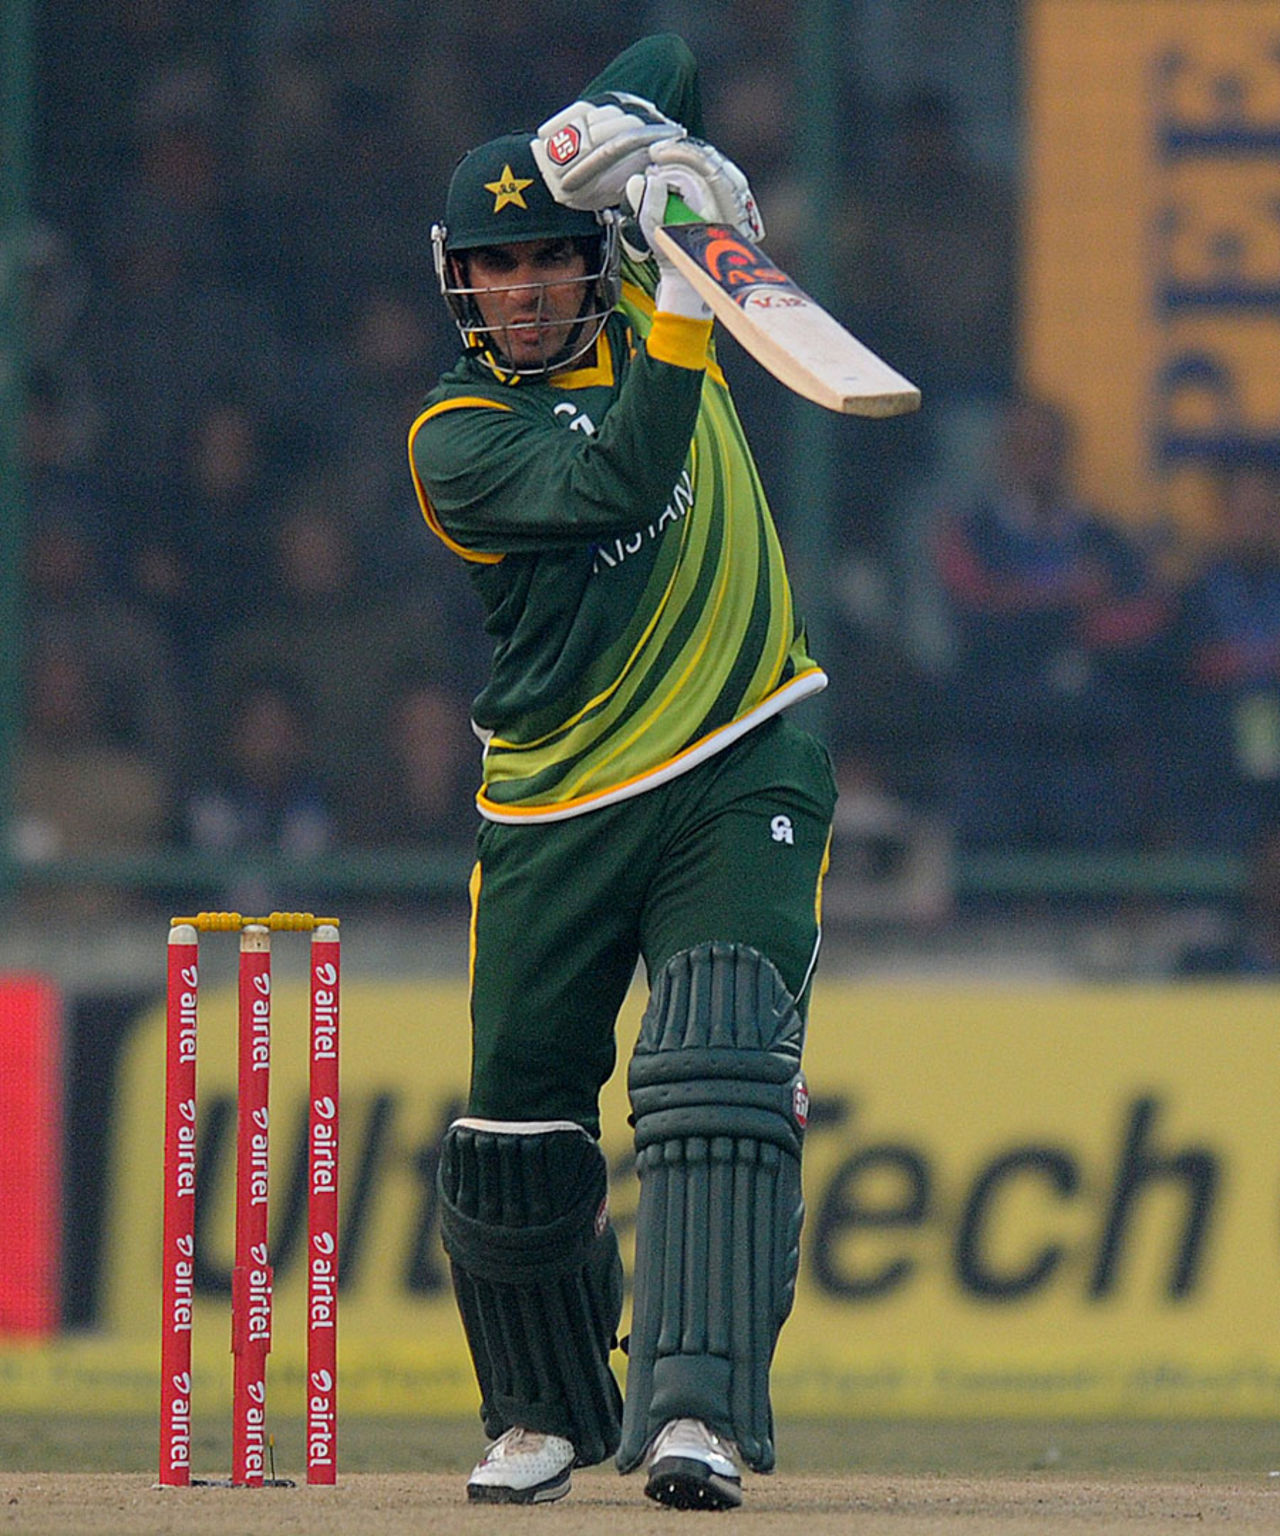 Misbah-ul-Haq helped steady Pakistan's innings after two early wickets, India v Pakistan, 3rd ODI, Delhi, January 6, 2013